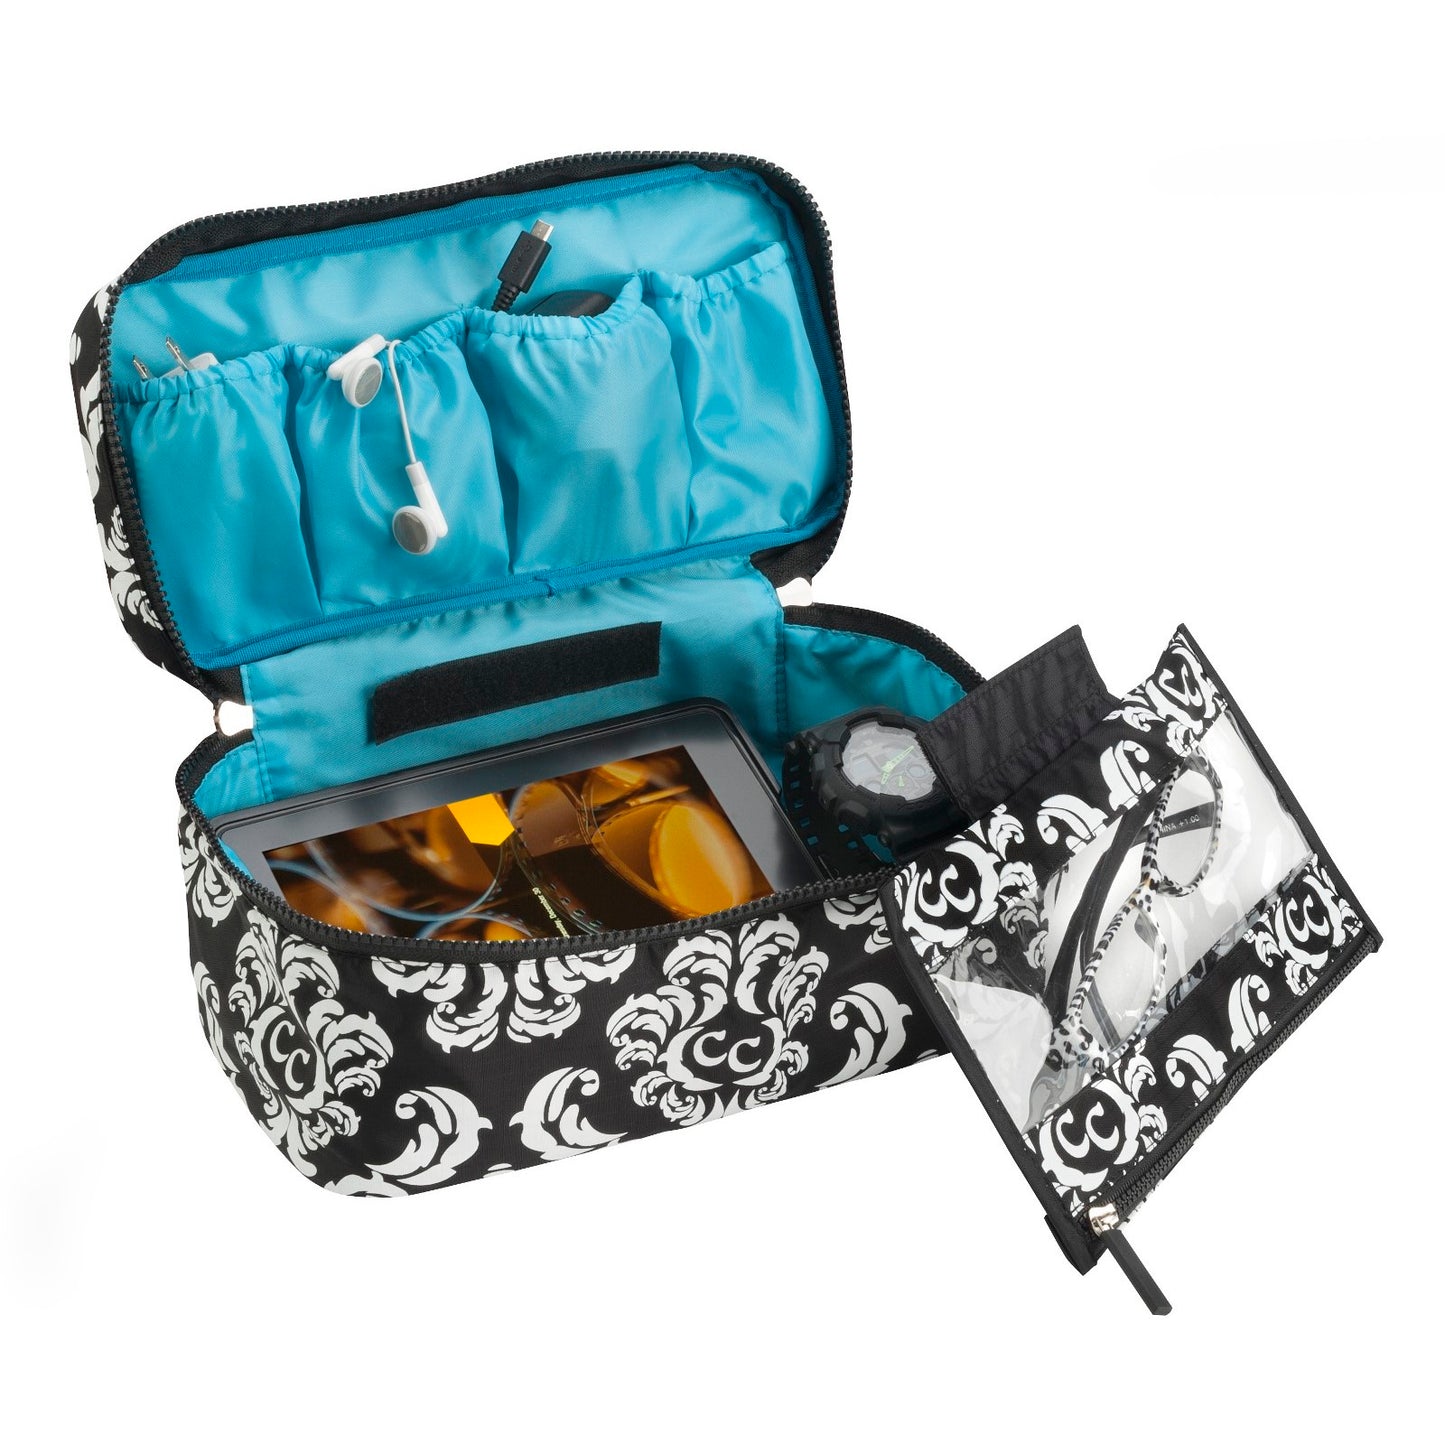 Tech & Toiletries Pouch - Damask with Teal